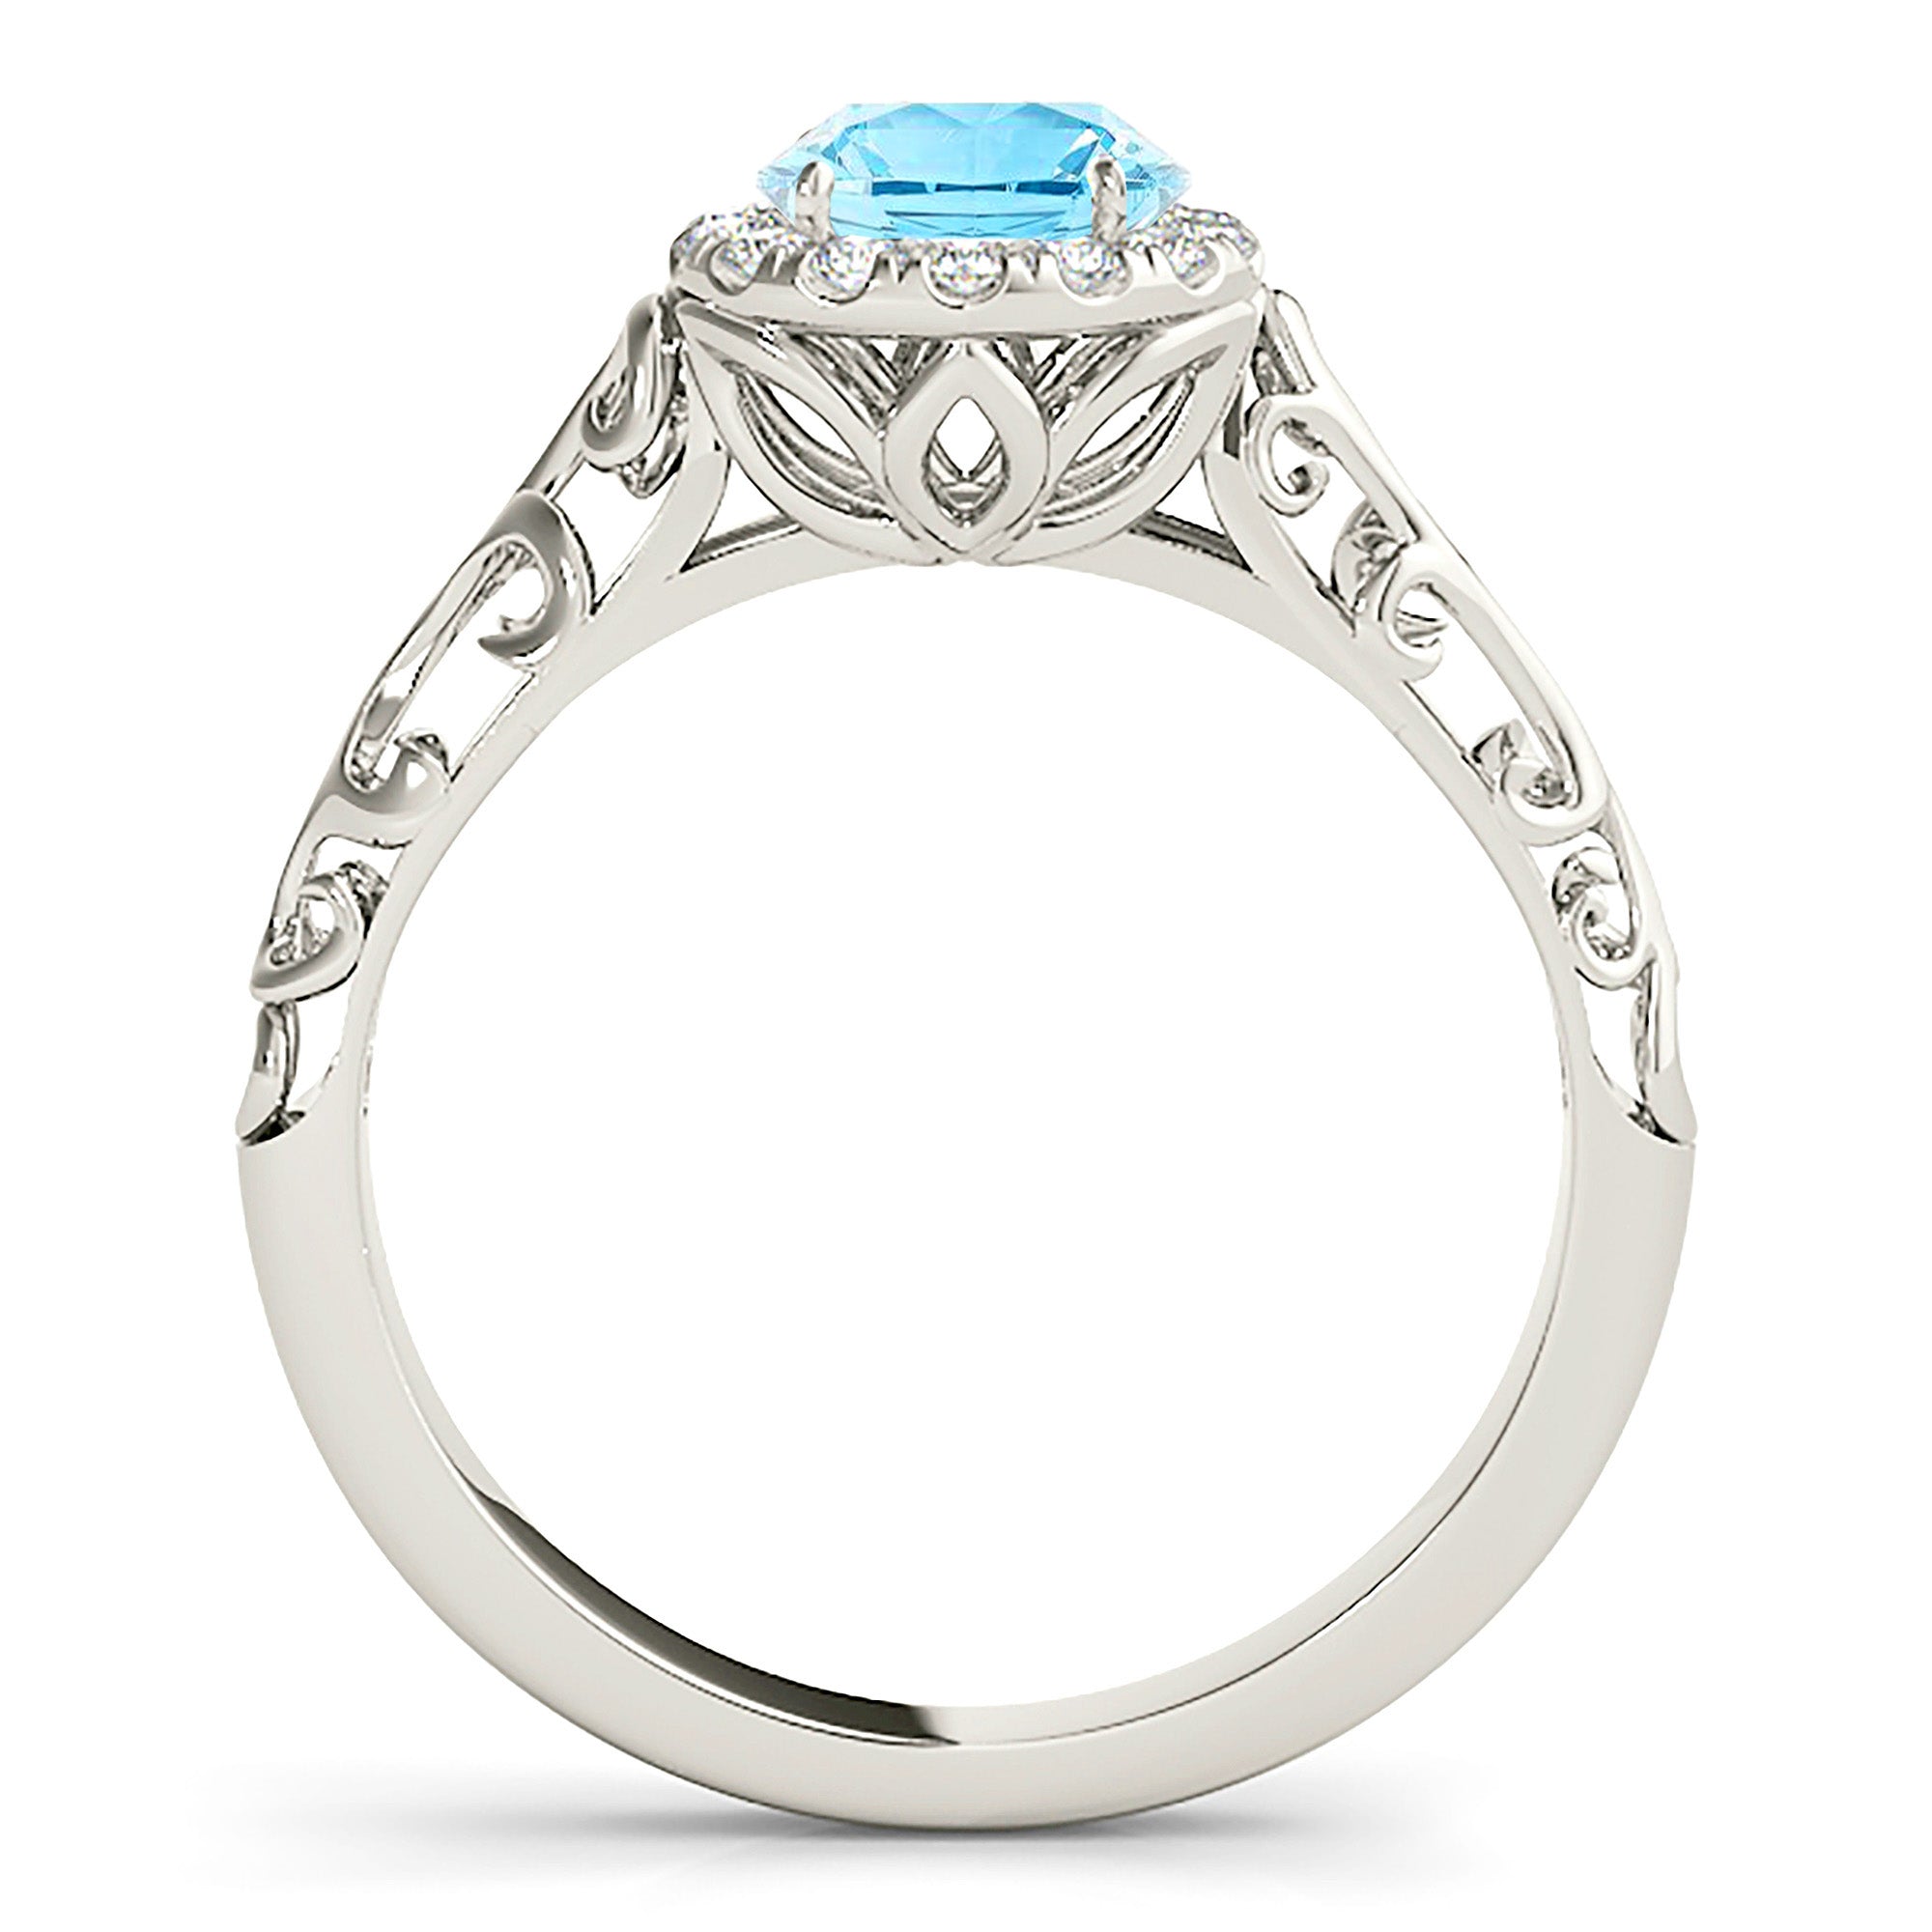 1.00 ct. Genuine Aquamarine Ring With 0.10 ctw. Diamond Halo, Floral Basket and Hand carved Fancy Band | Round Blue Aquamarine Halo Ring-in 14K/18K White, Yellow, Rose Gold and Platinum - Christmas Jewelry Gift -VIRABYANI